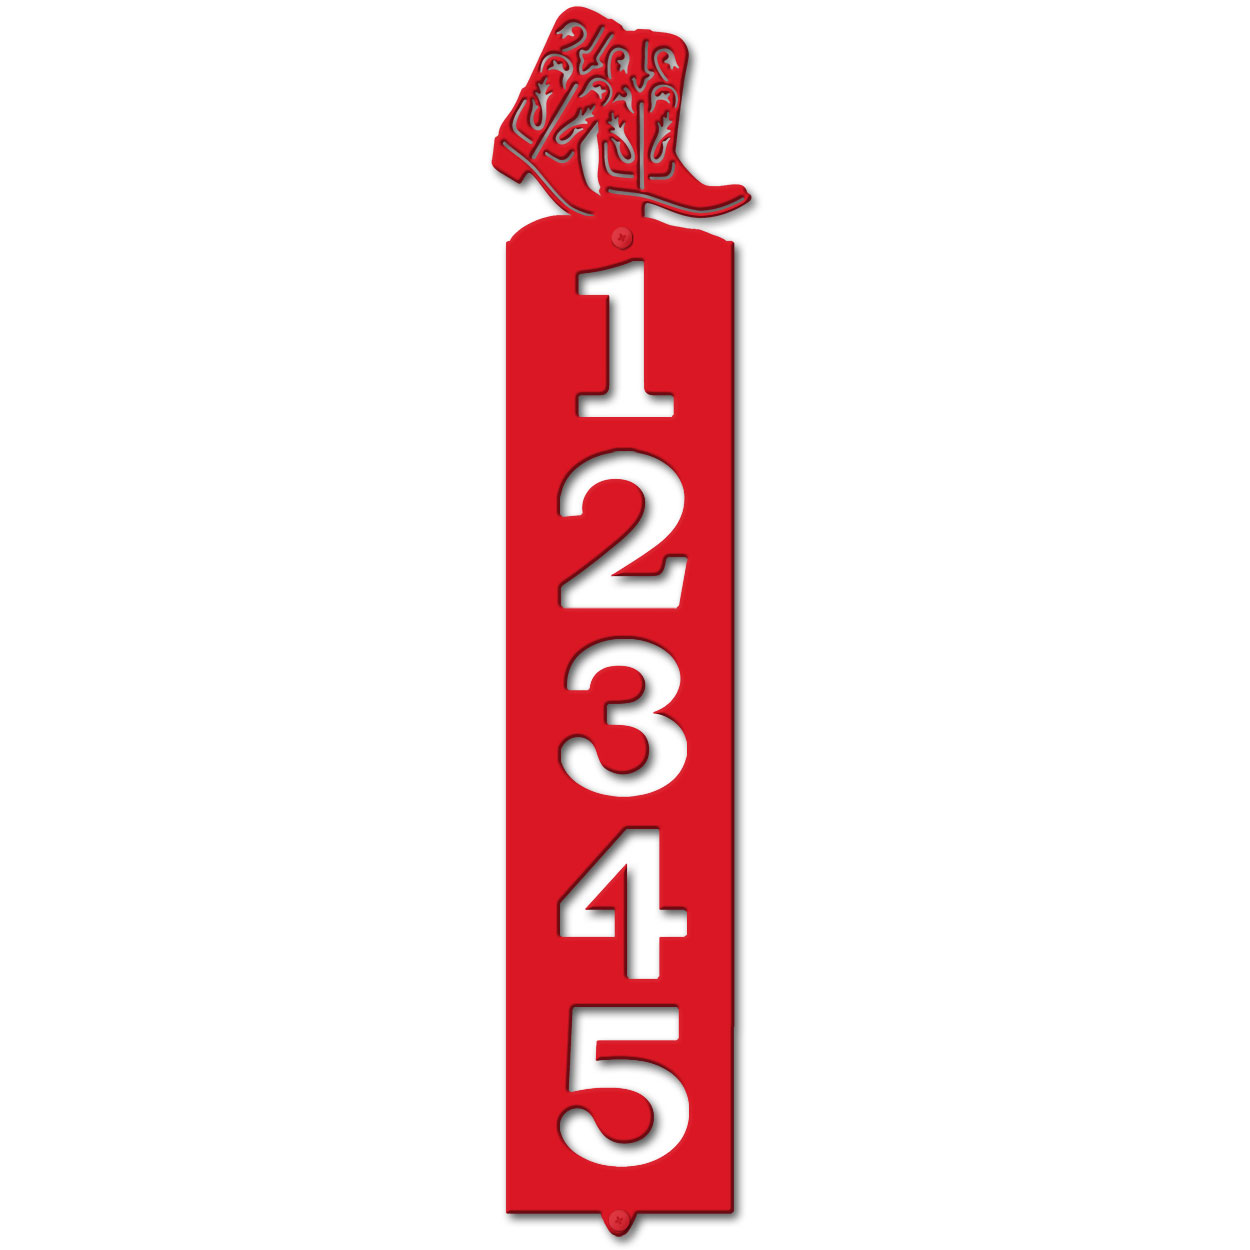 635035 - Boots Cut Outs Five Digit Address Number Plaque